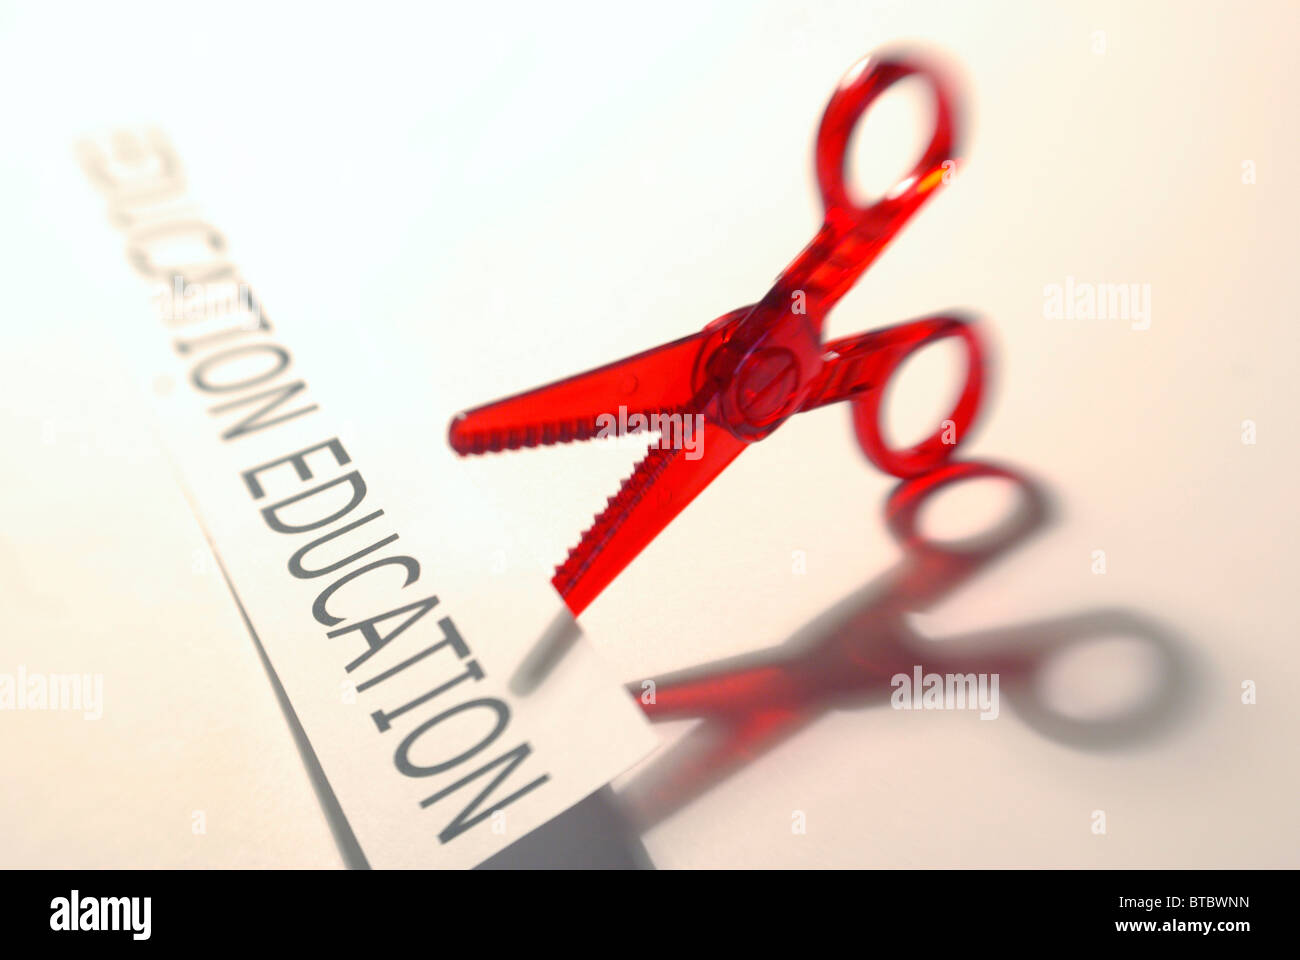 Education cuts concept featuring scissors and education  graphic Stock Photo